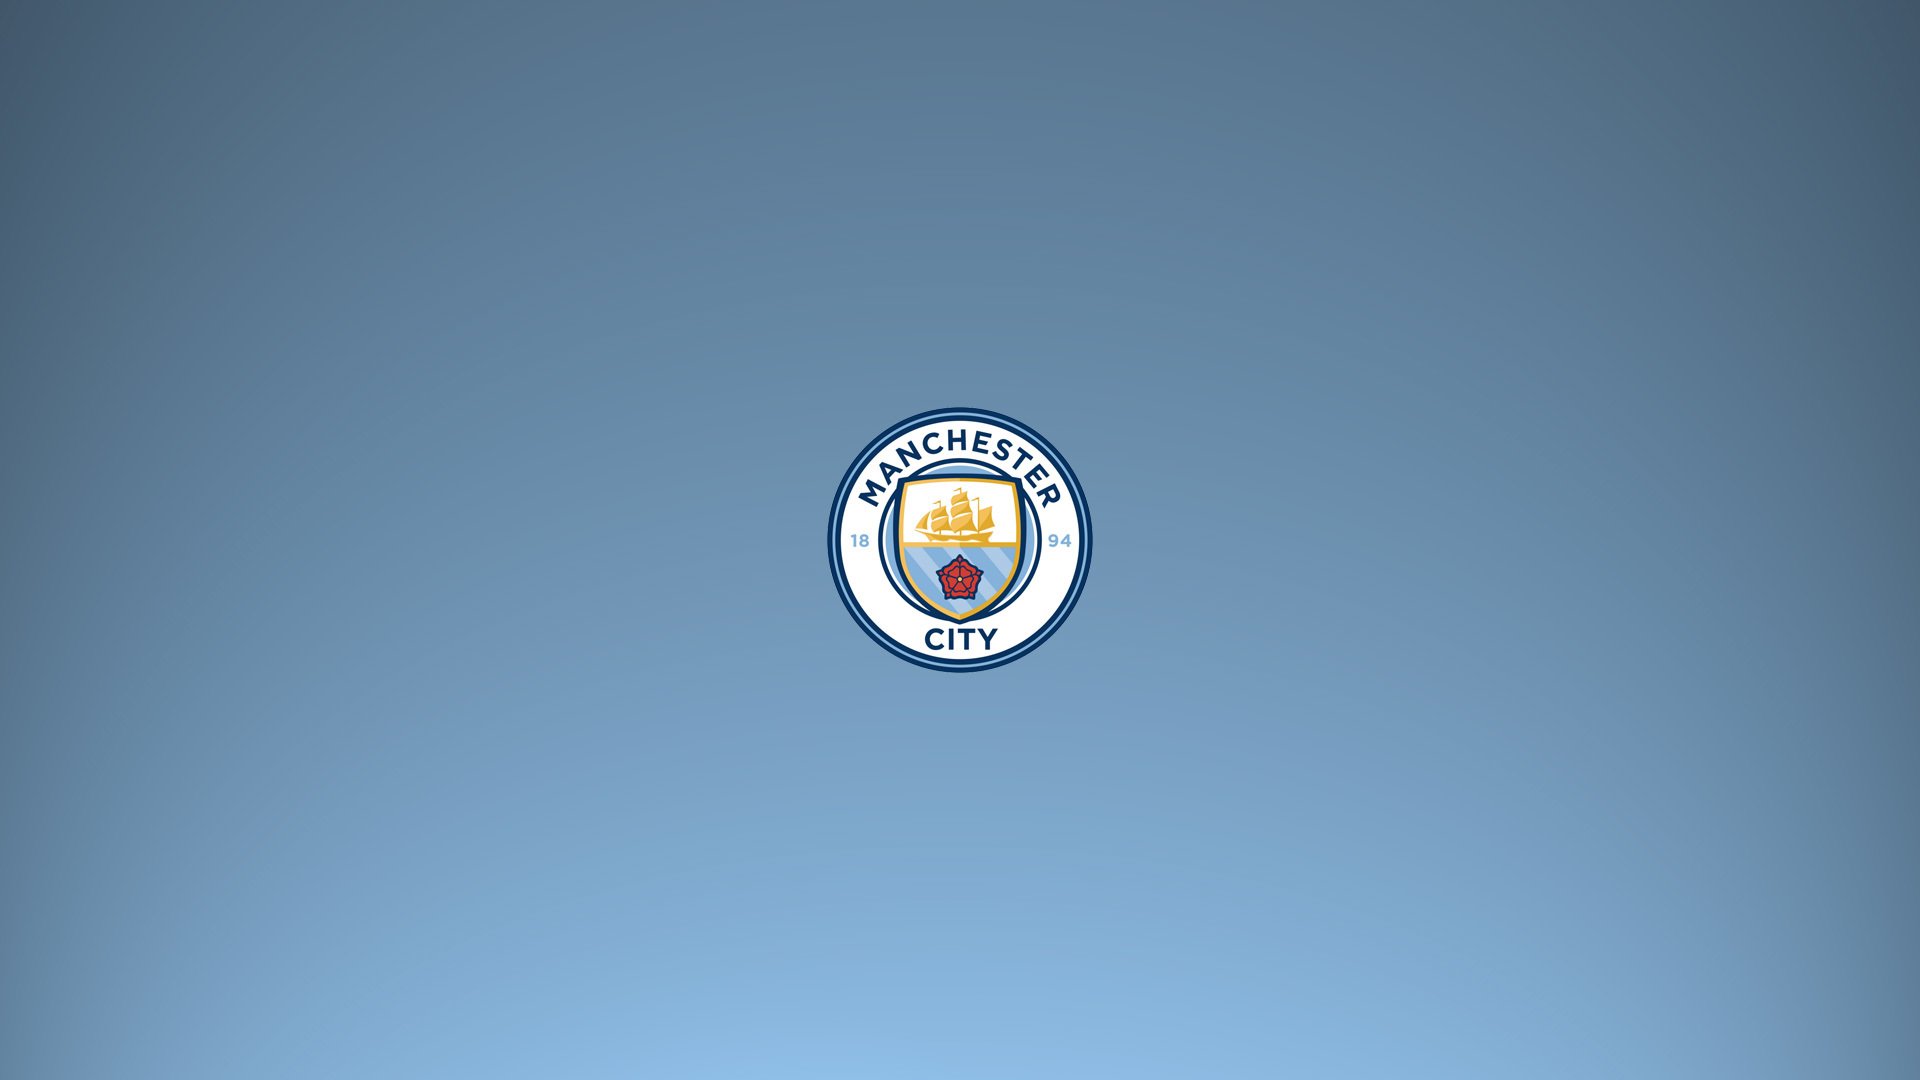 Manchester City: Images / Wallpaper Background